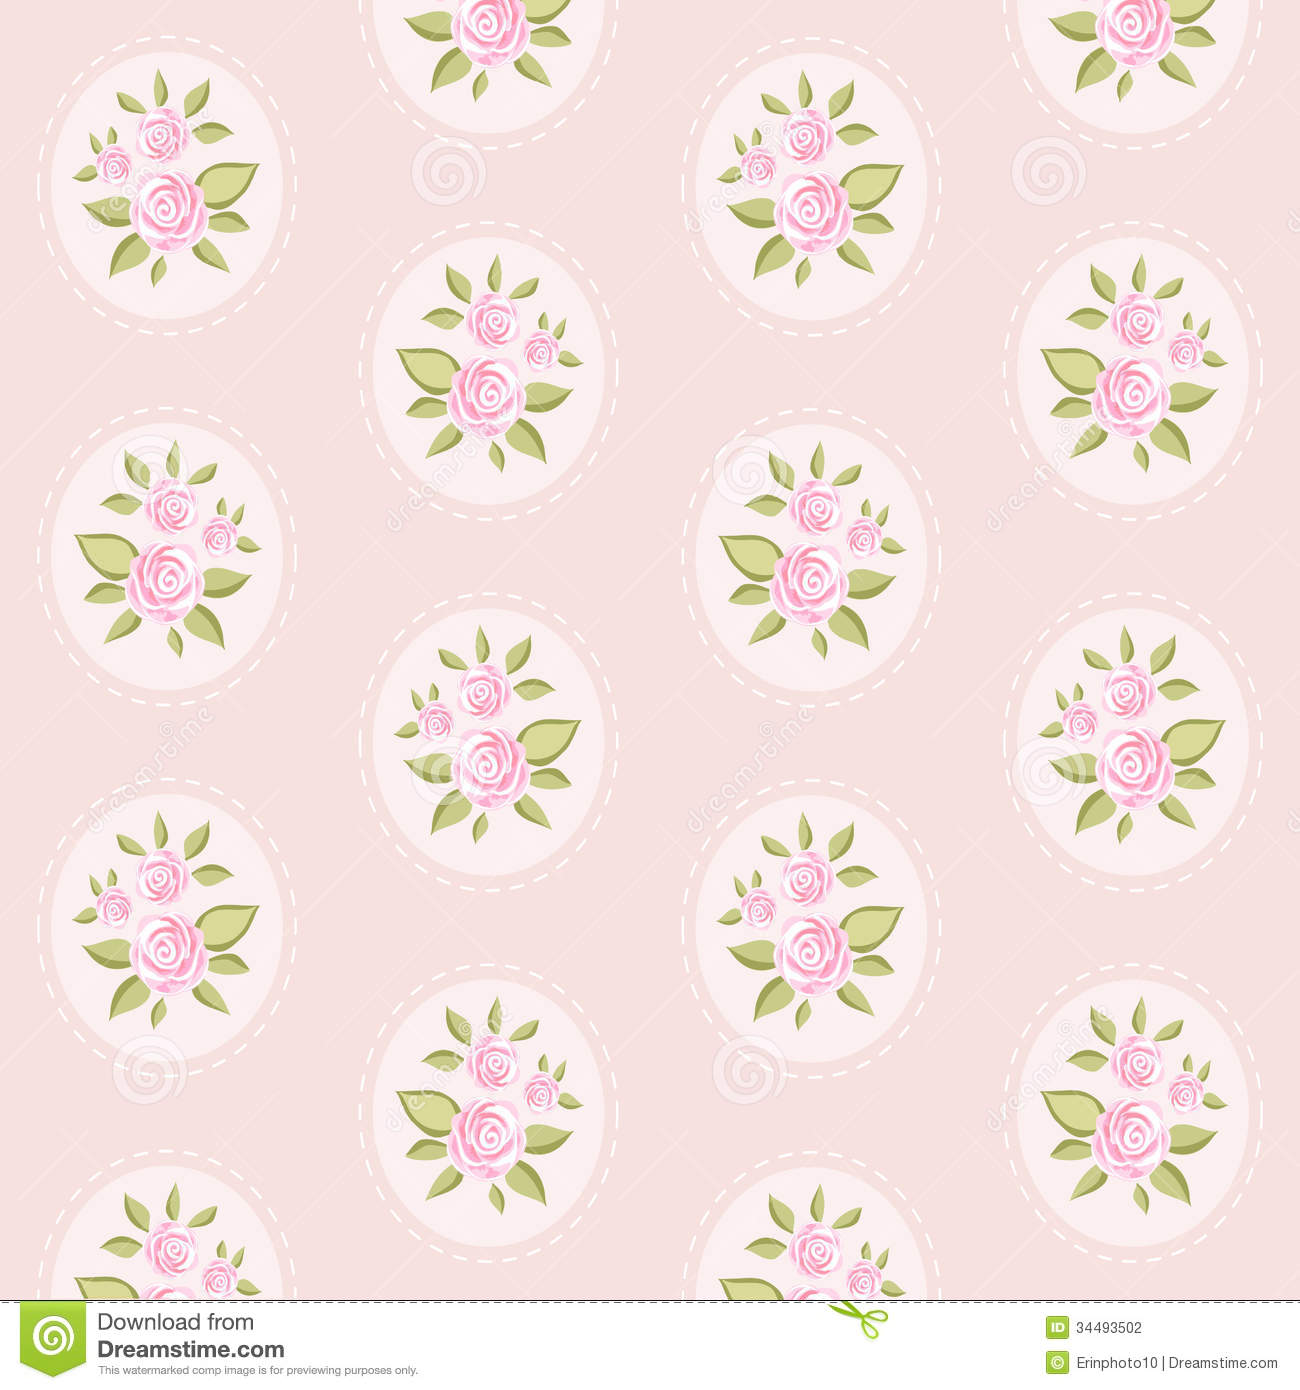 Vintage Floral Pattern With Roses In Shabby Chic Style As Wallpaper